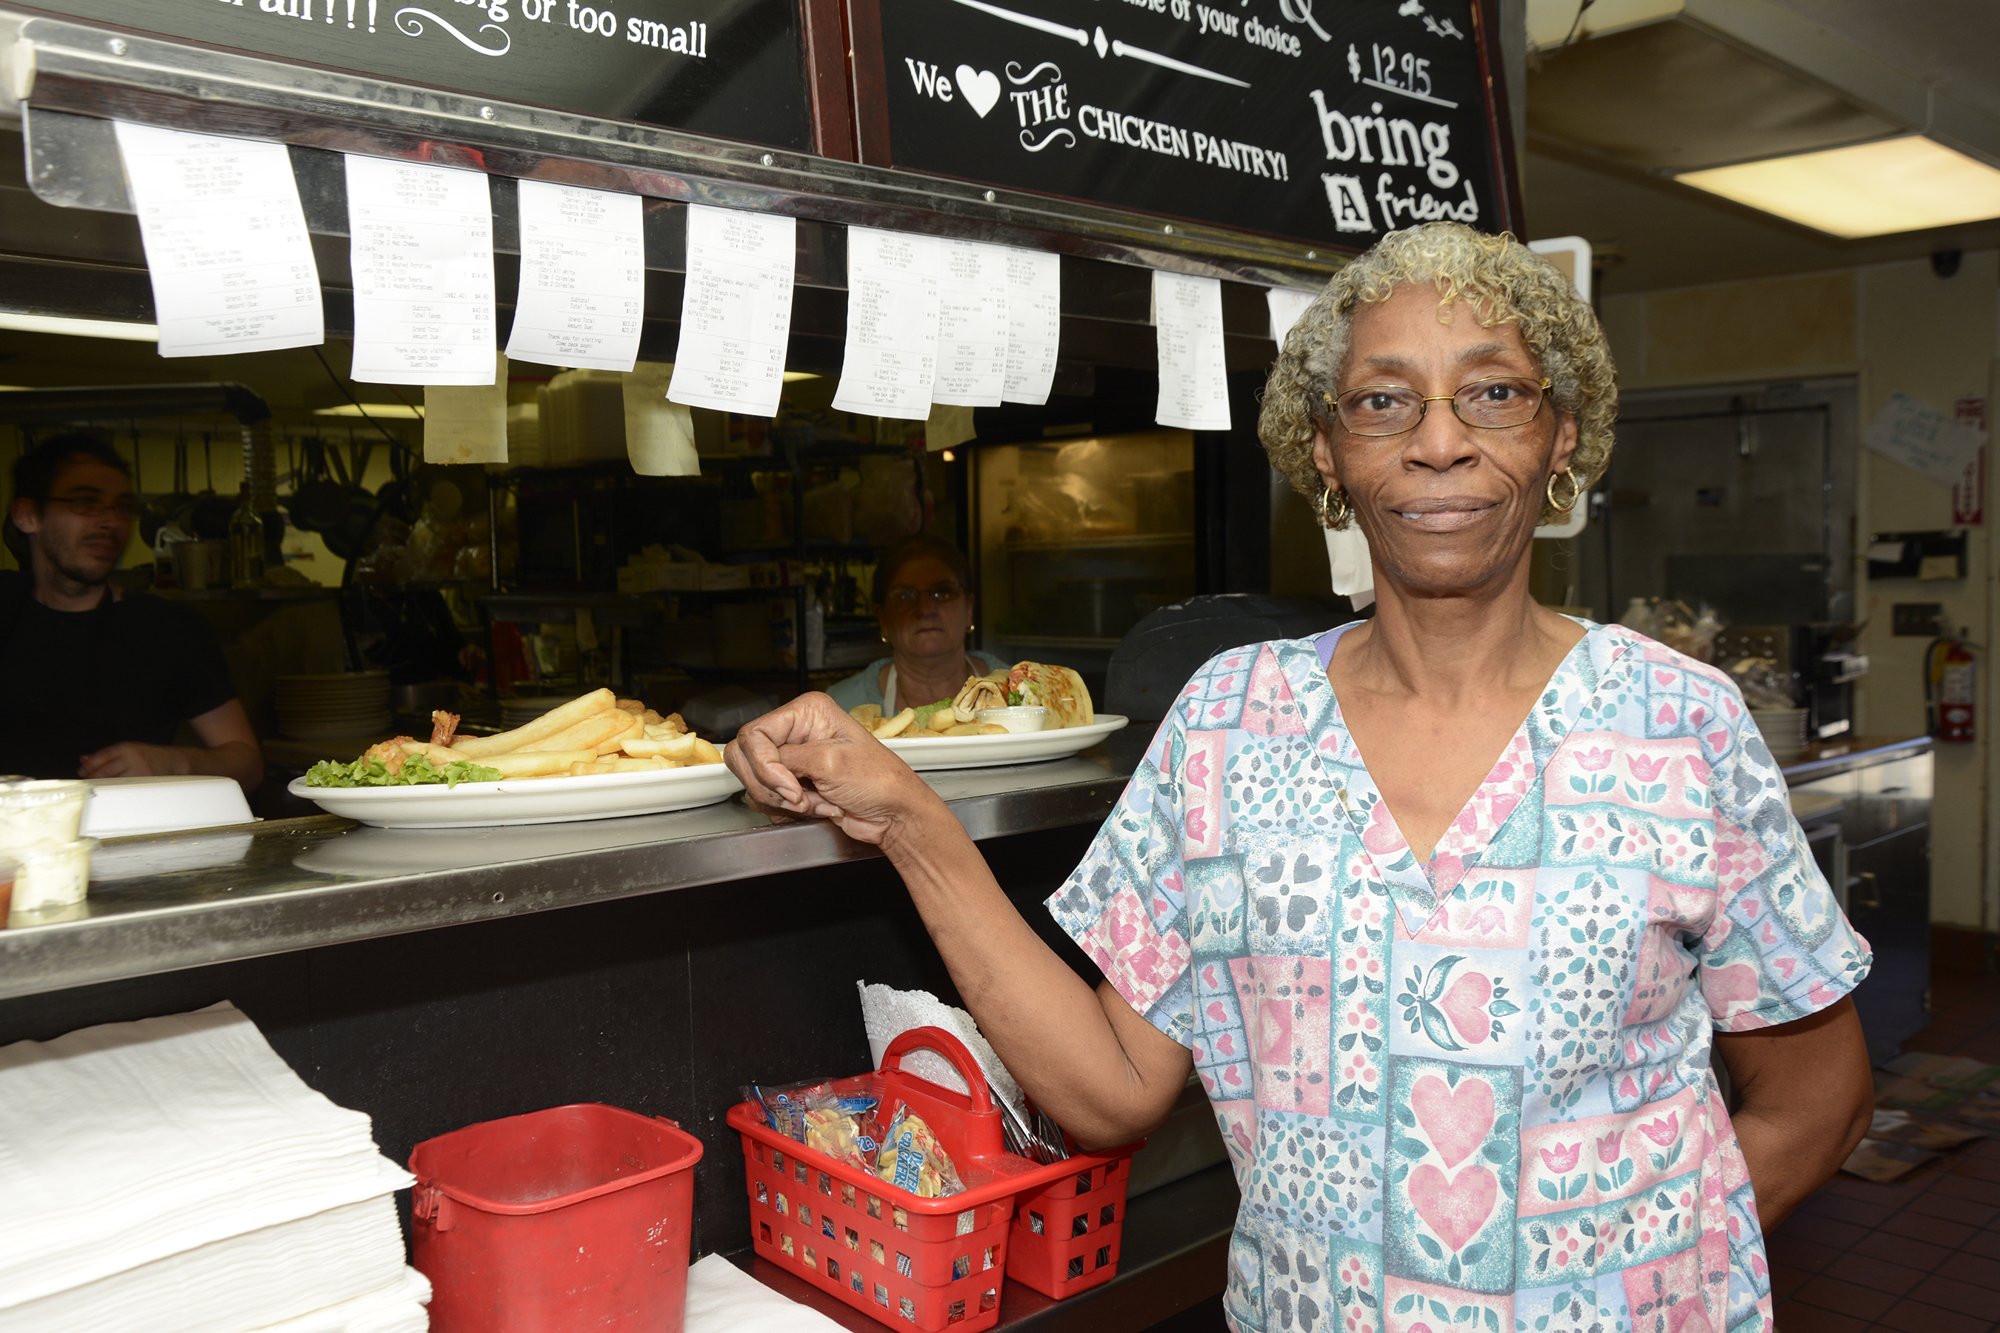 Mary Lou Cooper met Sister at the age of 24, and they became inseparable friends for life. The two shared many memories together working side-by-side at many of the local restaurants. Photo by Anastasia Pagello